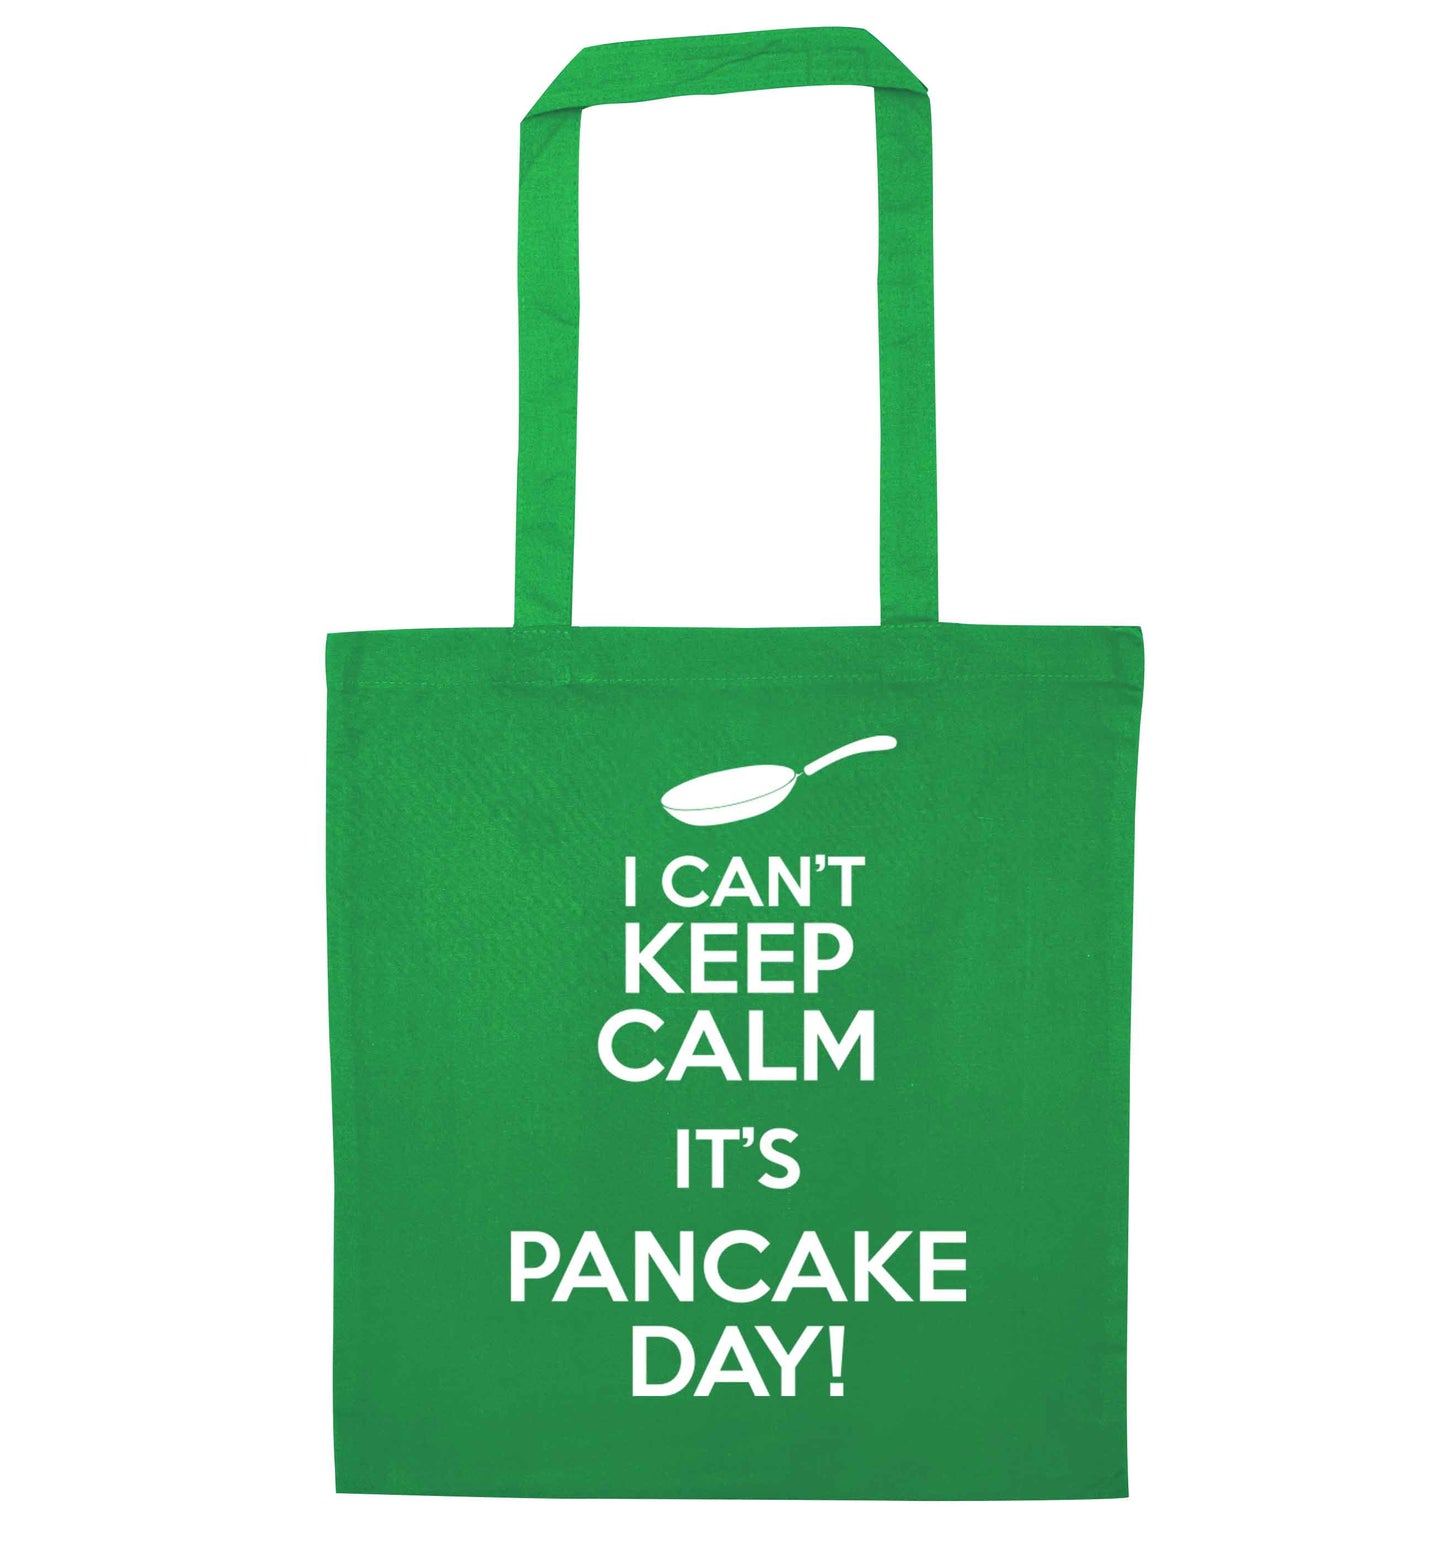 I can't keep calm it's pancake day! green tote bag